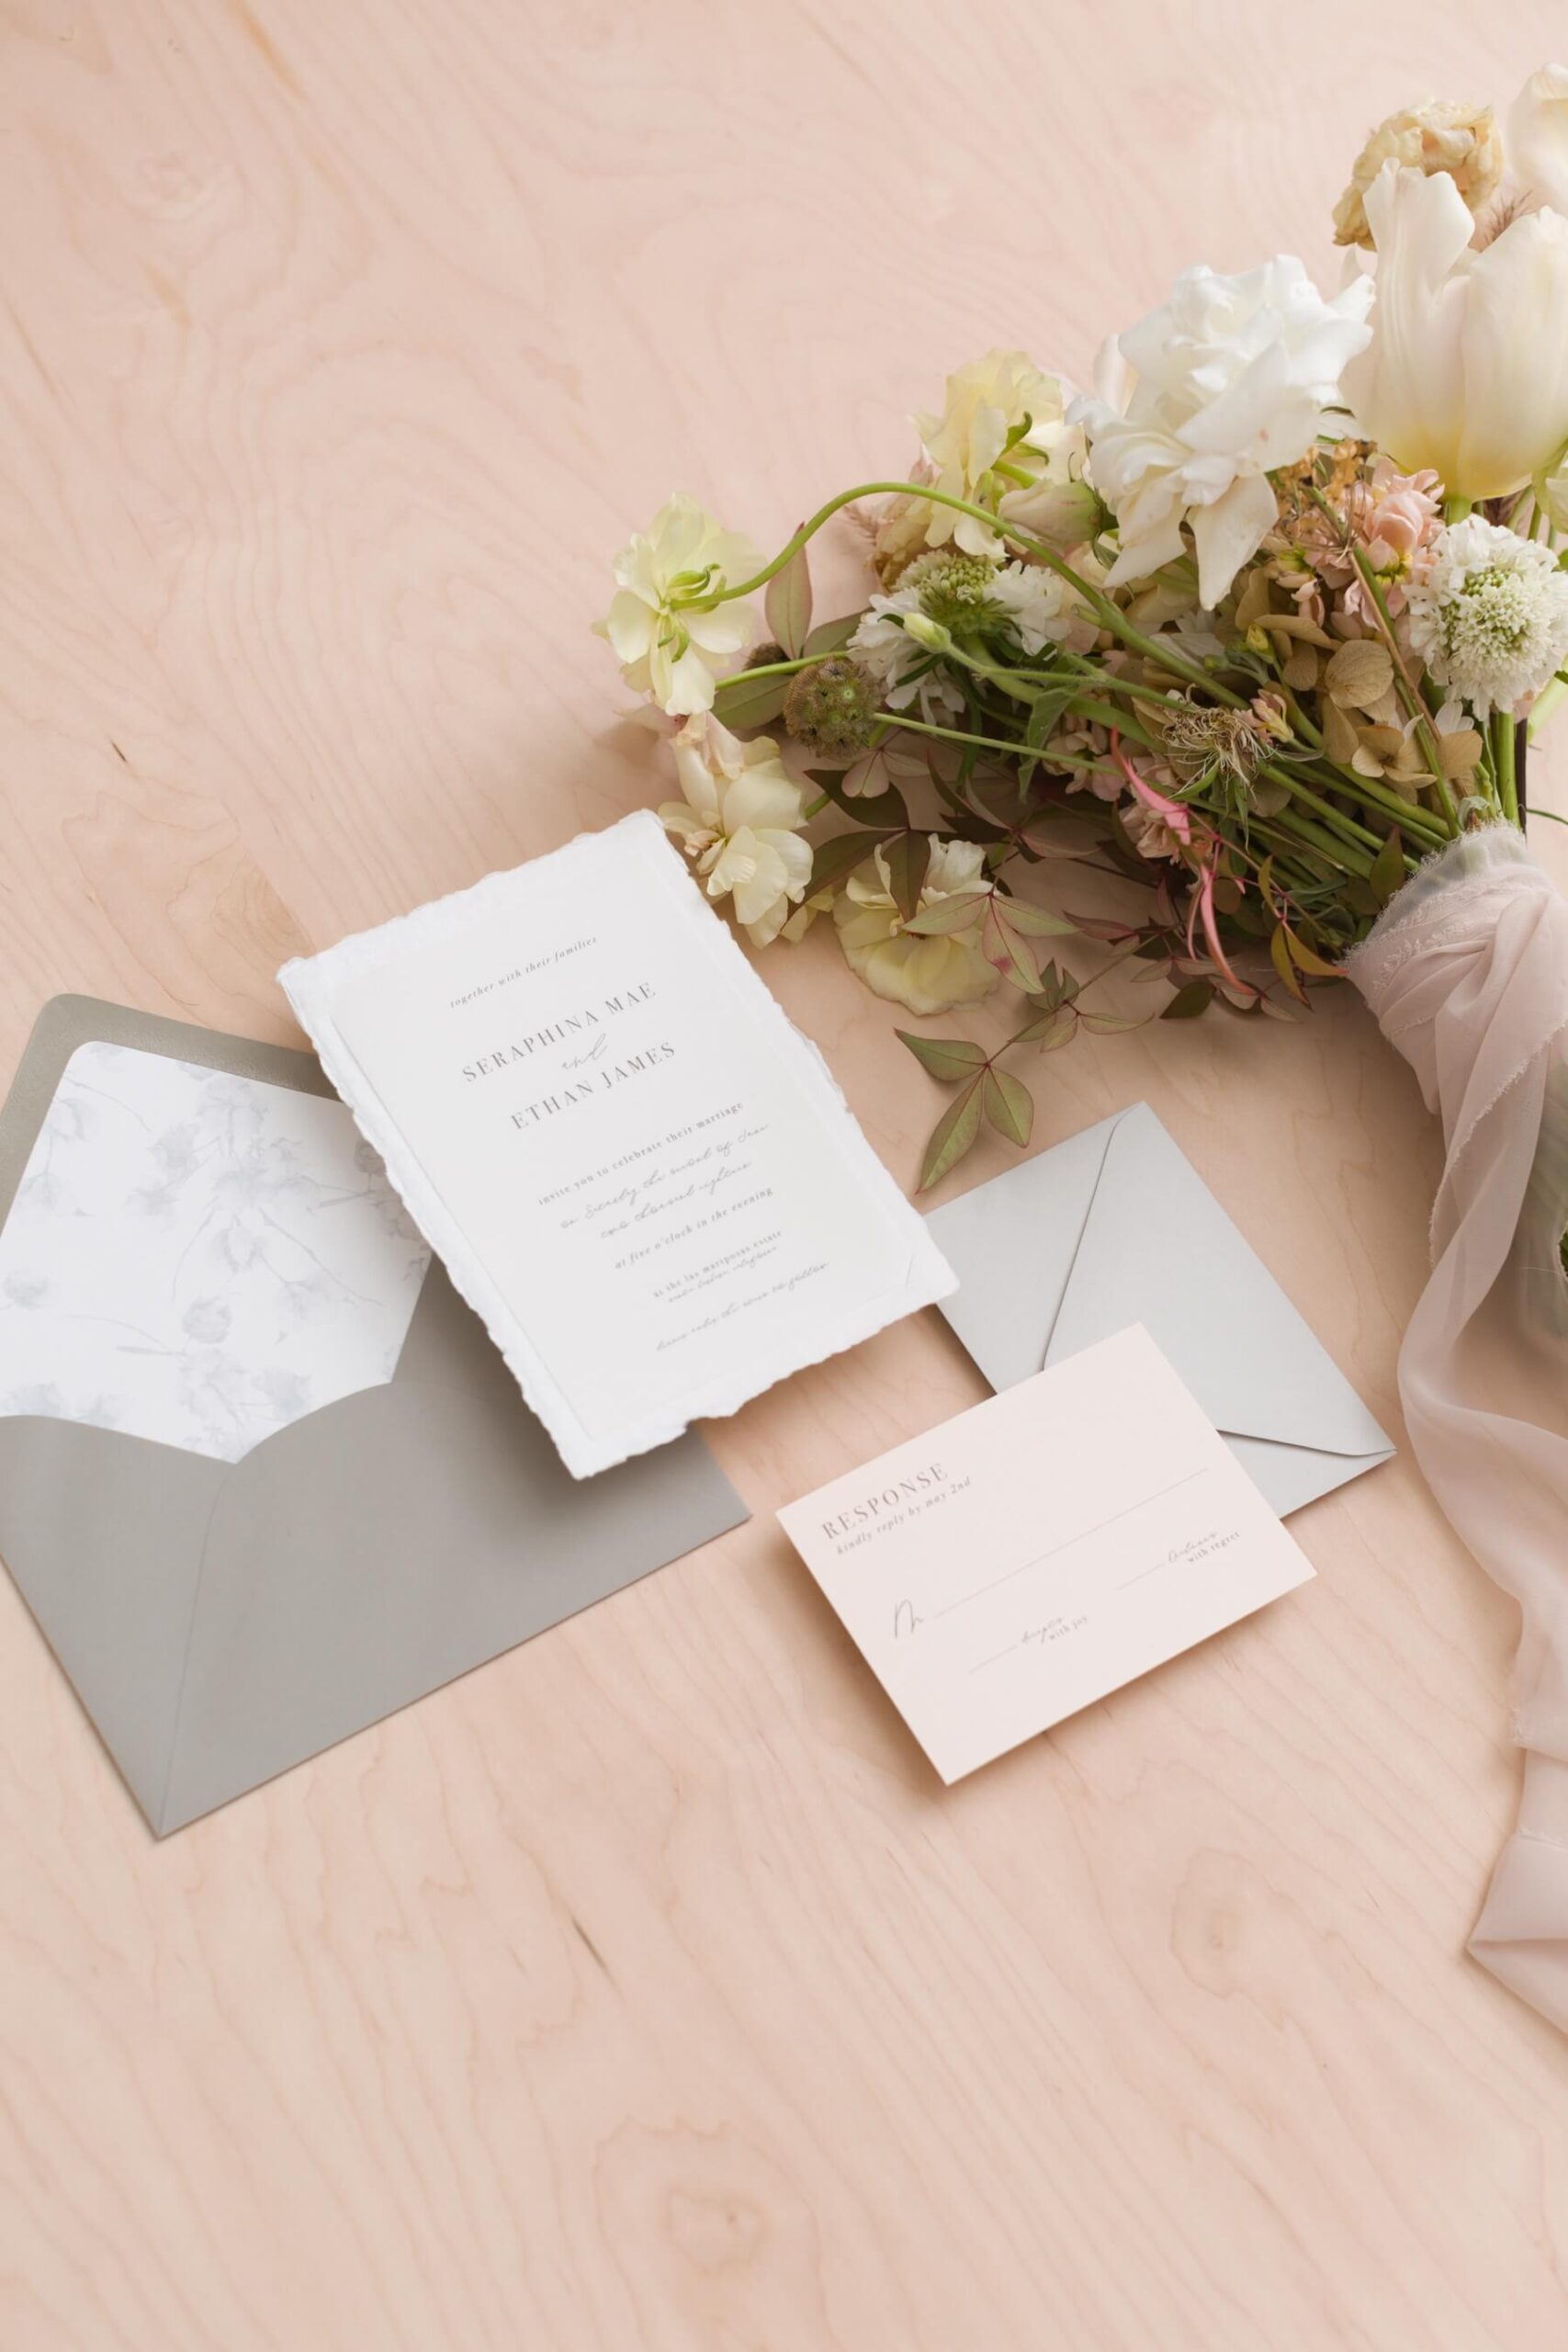 Wedding invitation with RSVP card and a bouquet of flowers